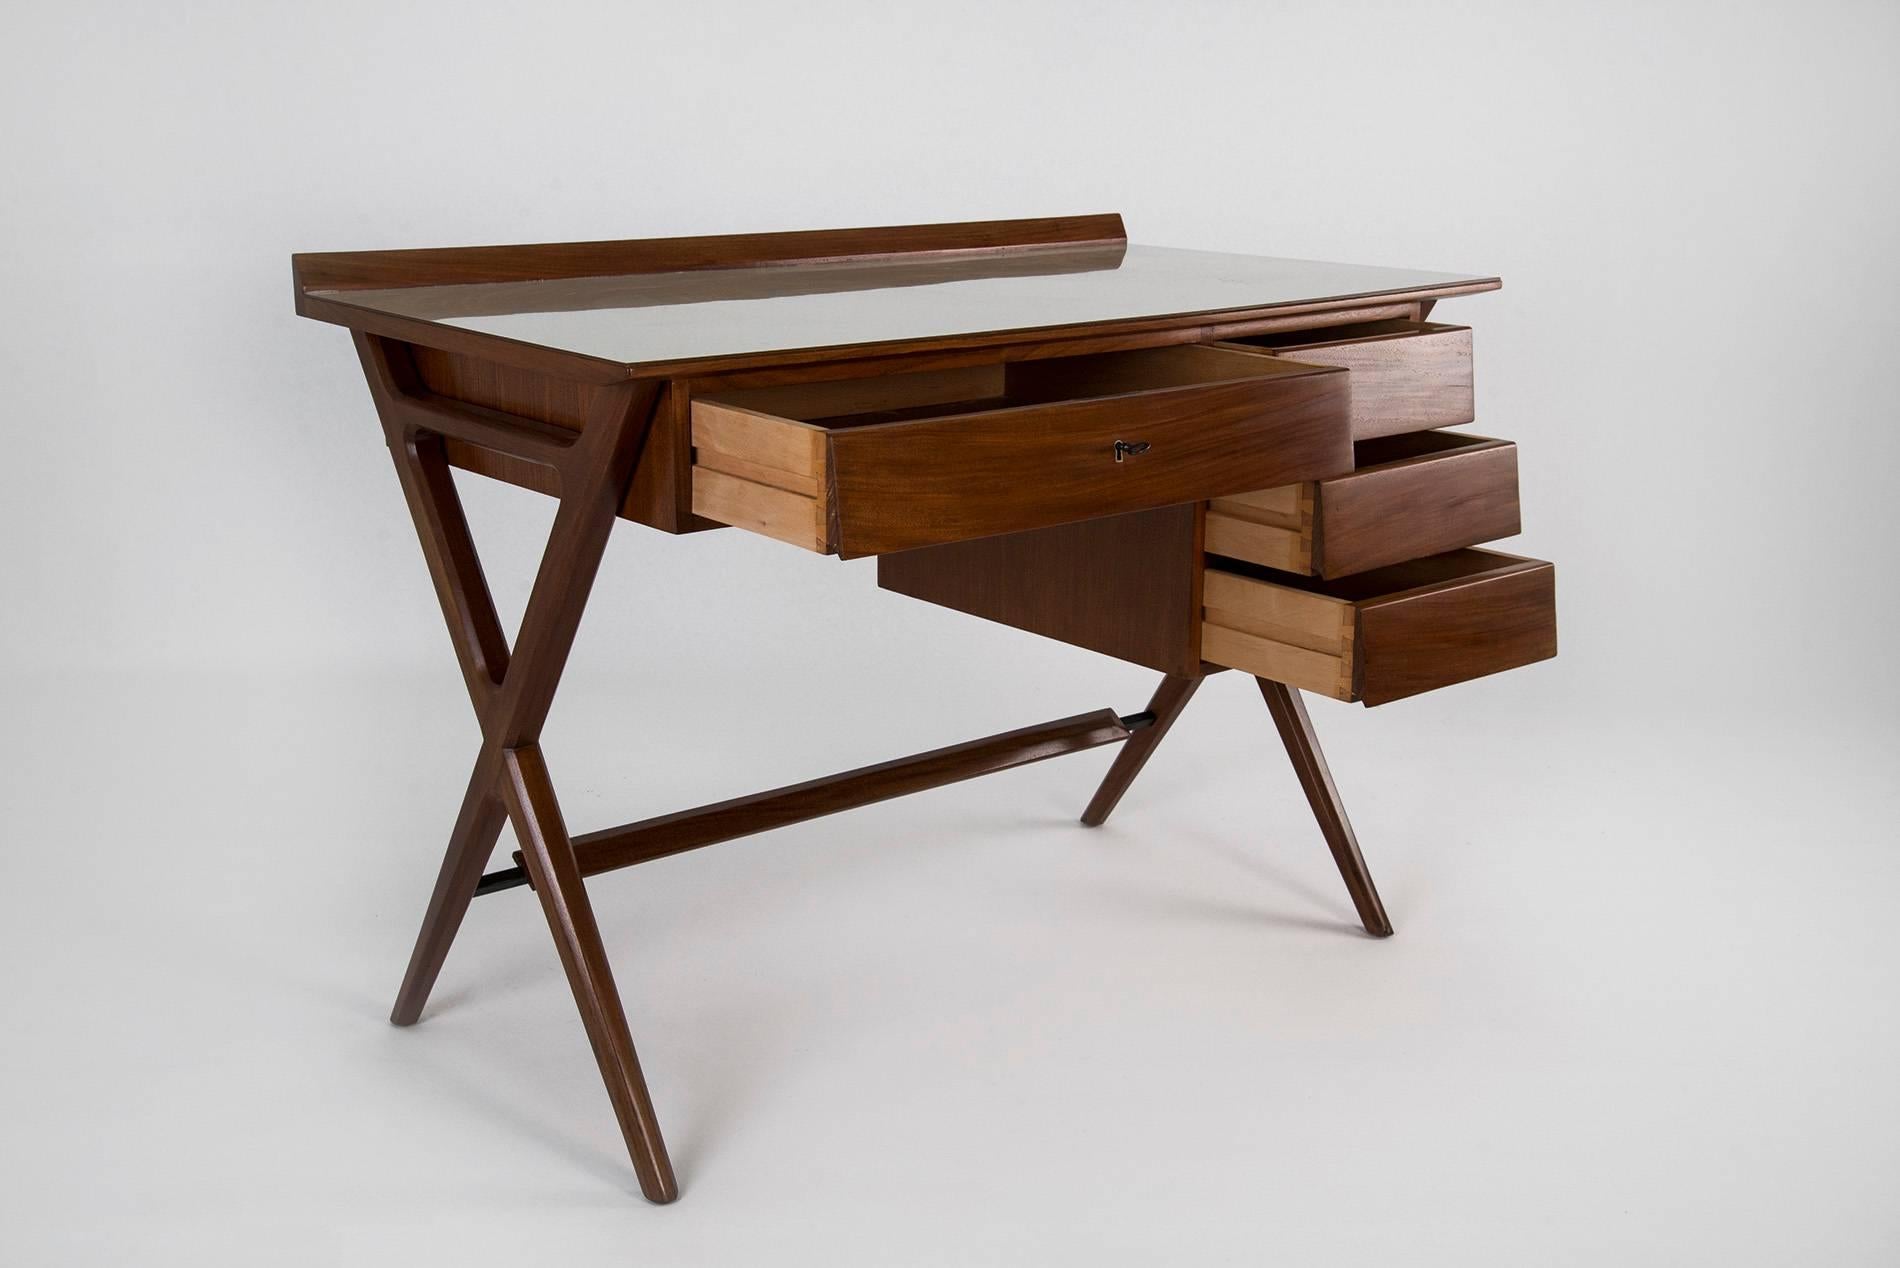 Pair of desks manufactured in Italy in the 1950s. Mahogany structure with a formica top, four drawers (the central one can be locked). Completely restored.